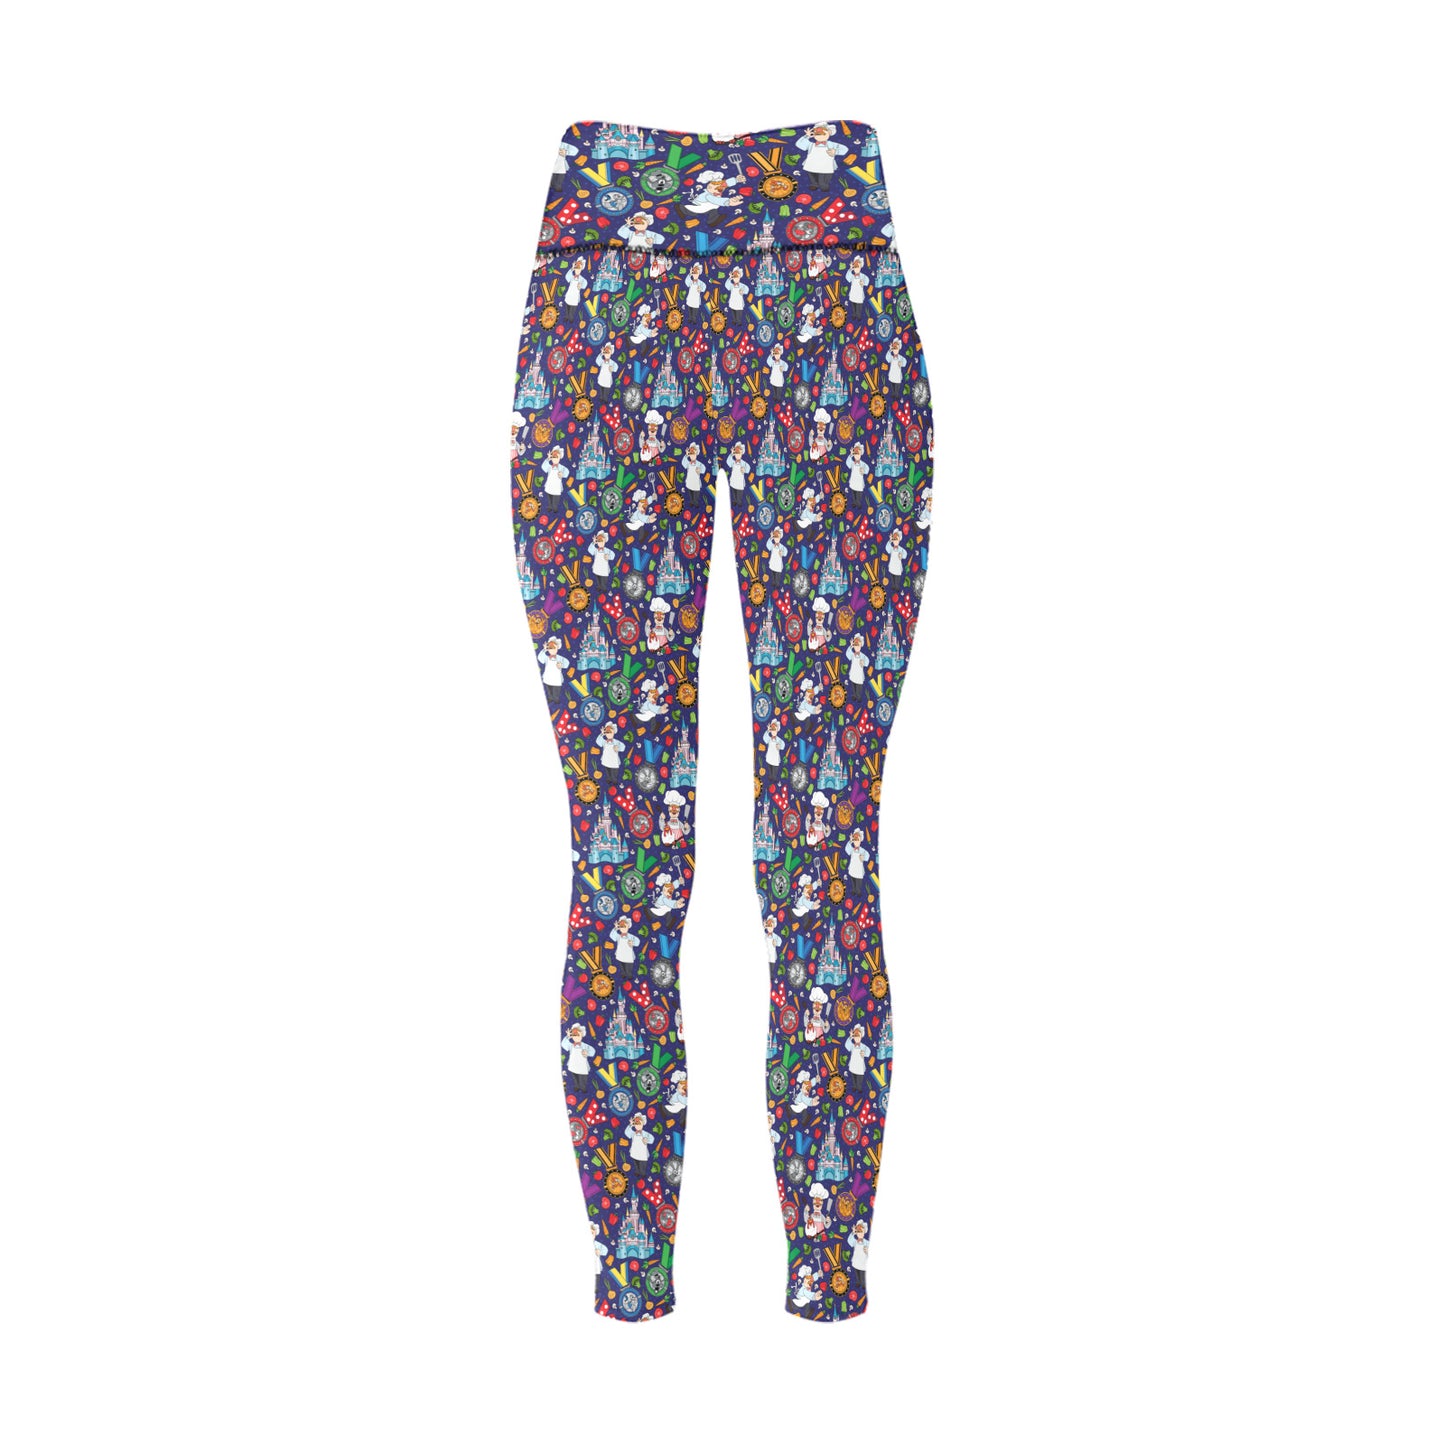 Muppets Chef Wine And Dine Race Women's Athletic Leggings